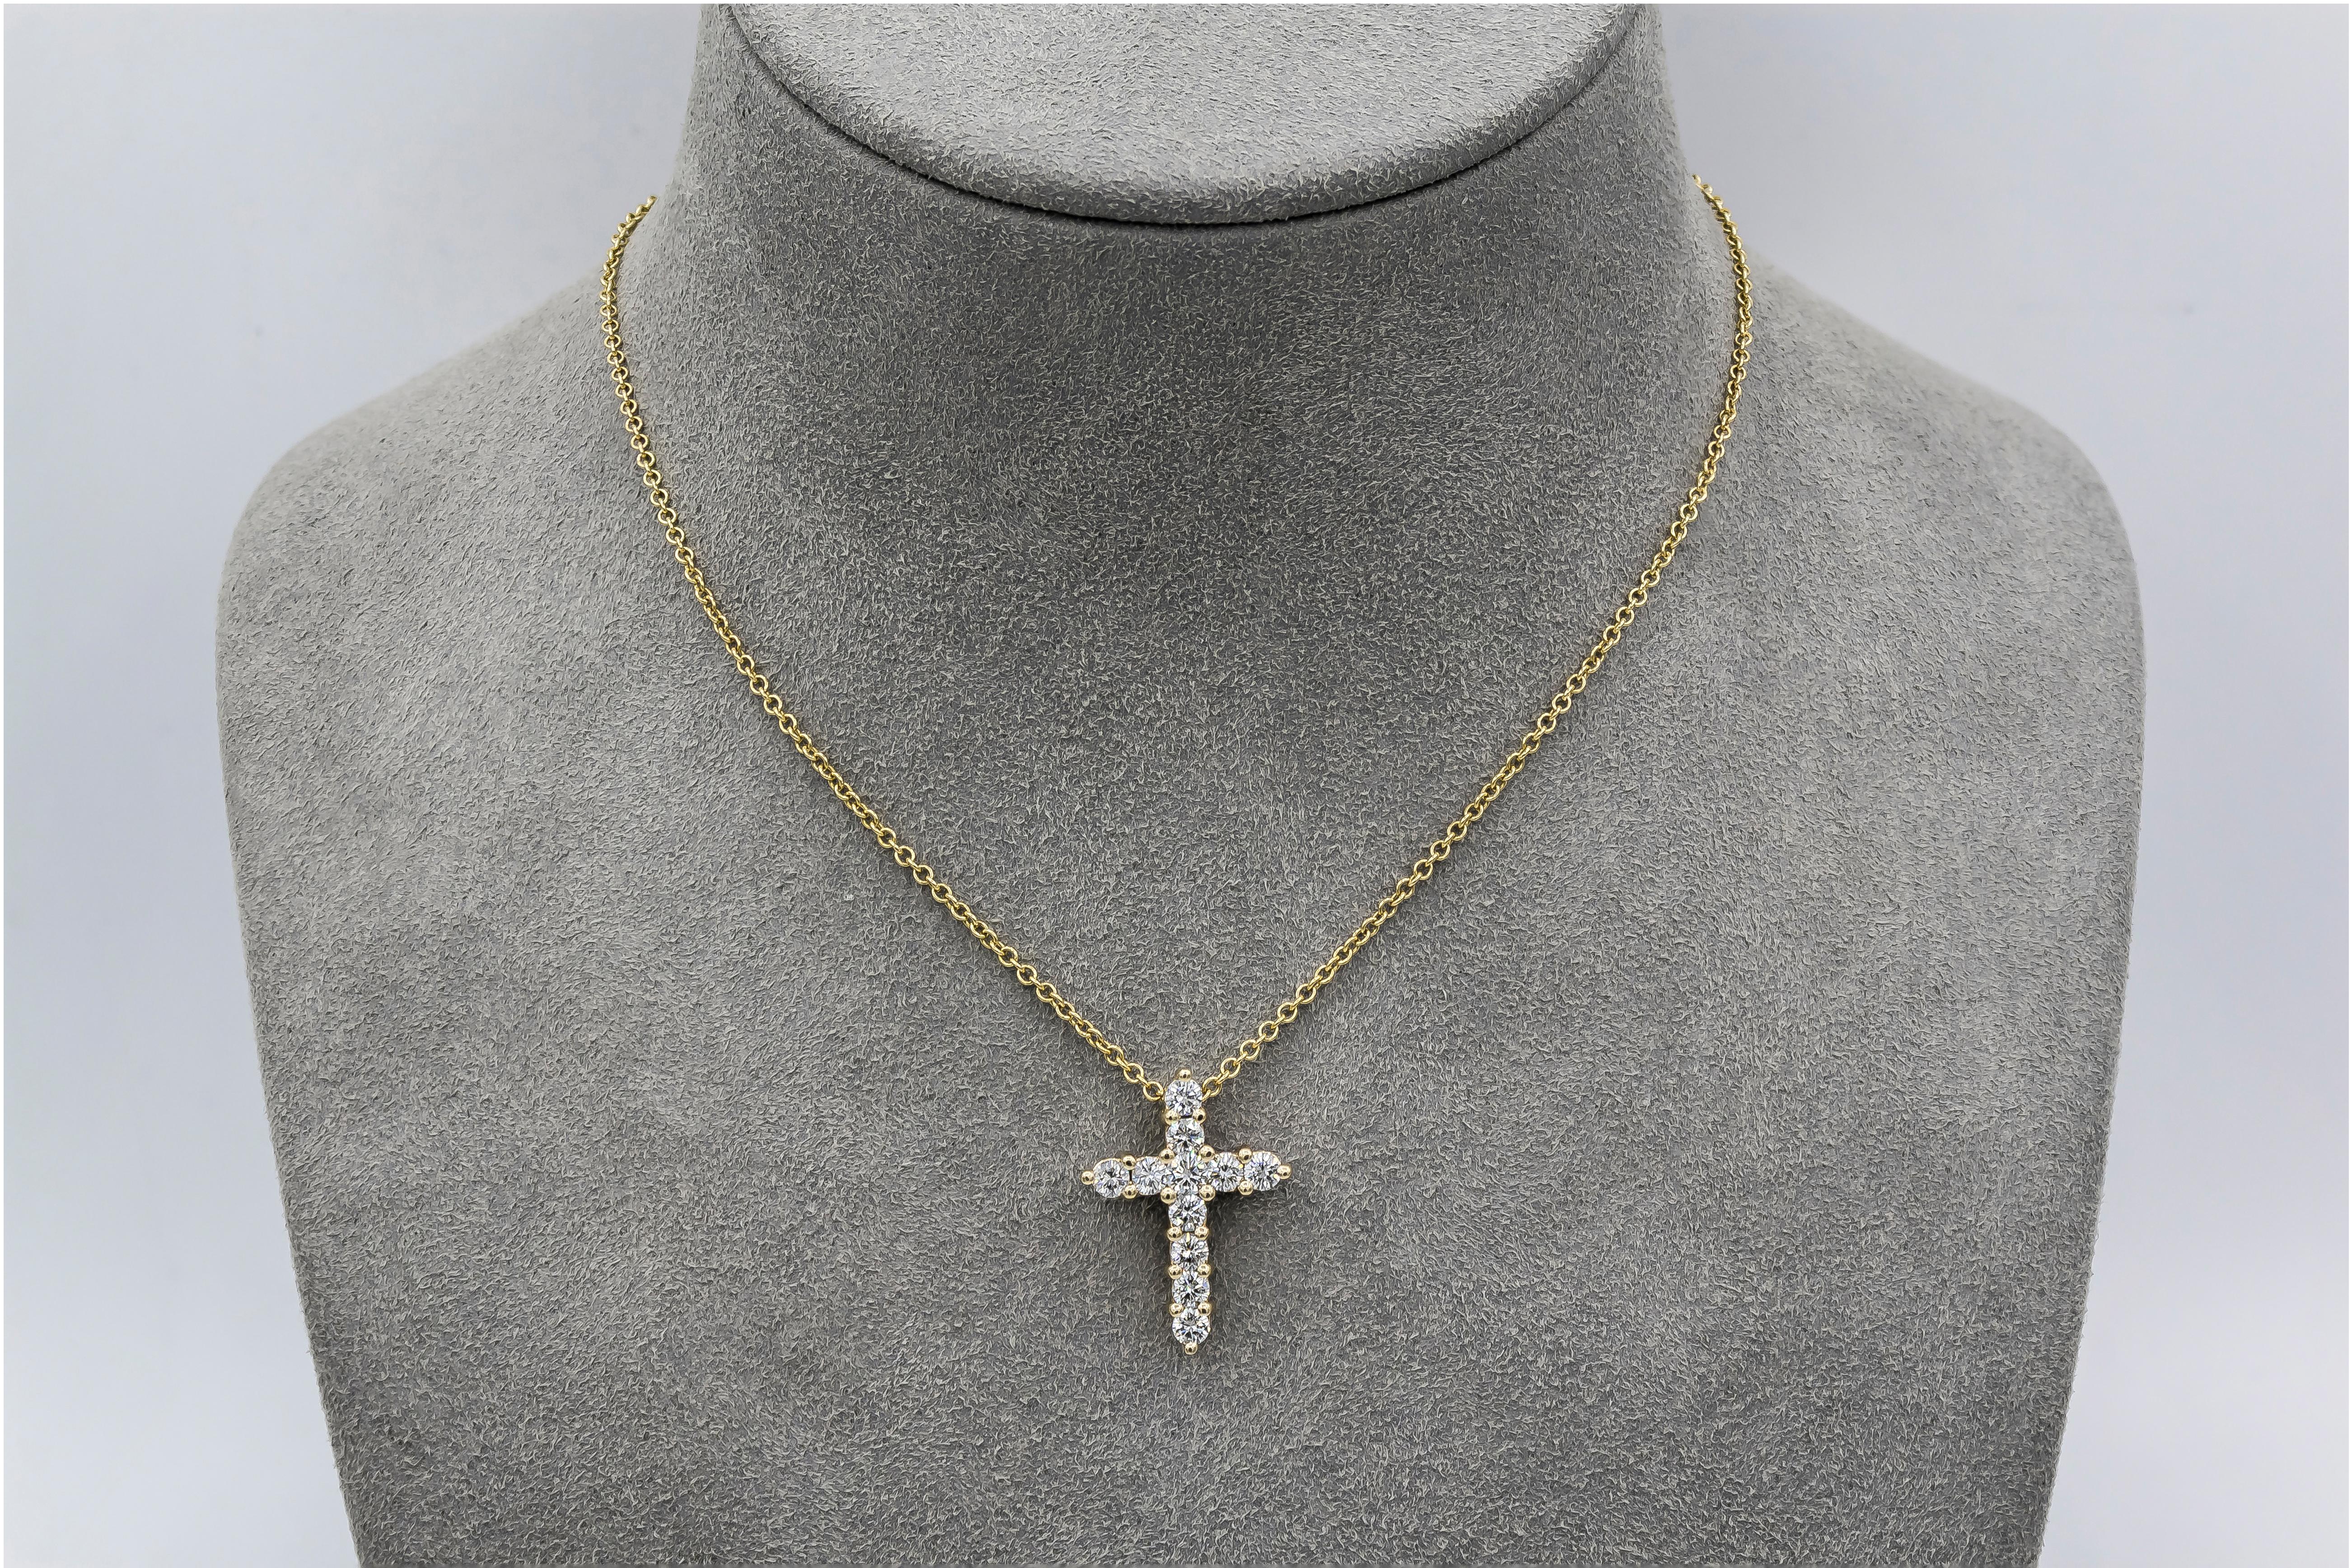 A classic cross pendant necklace showcasing round brilliant diamonds set in shared prongs made in 14 karat yellow gold. Suspended on an 18 inch yellow gold chain. 

Style available in different price ranges. Prices are based on your selection of the